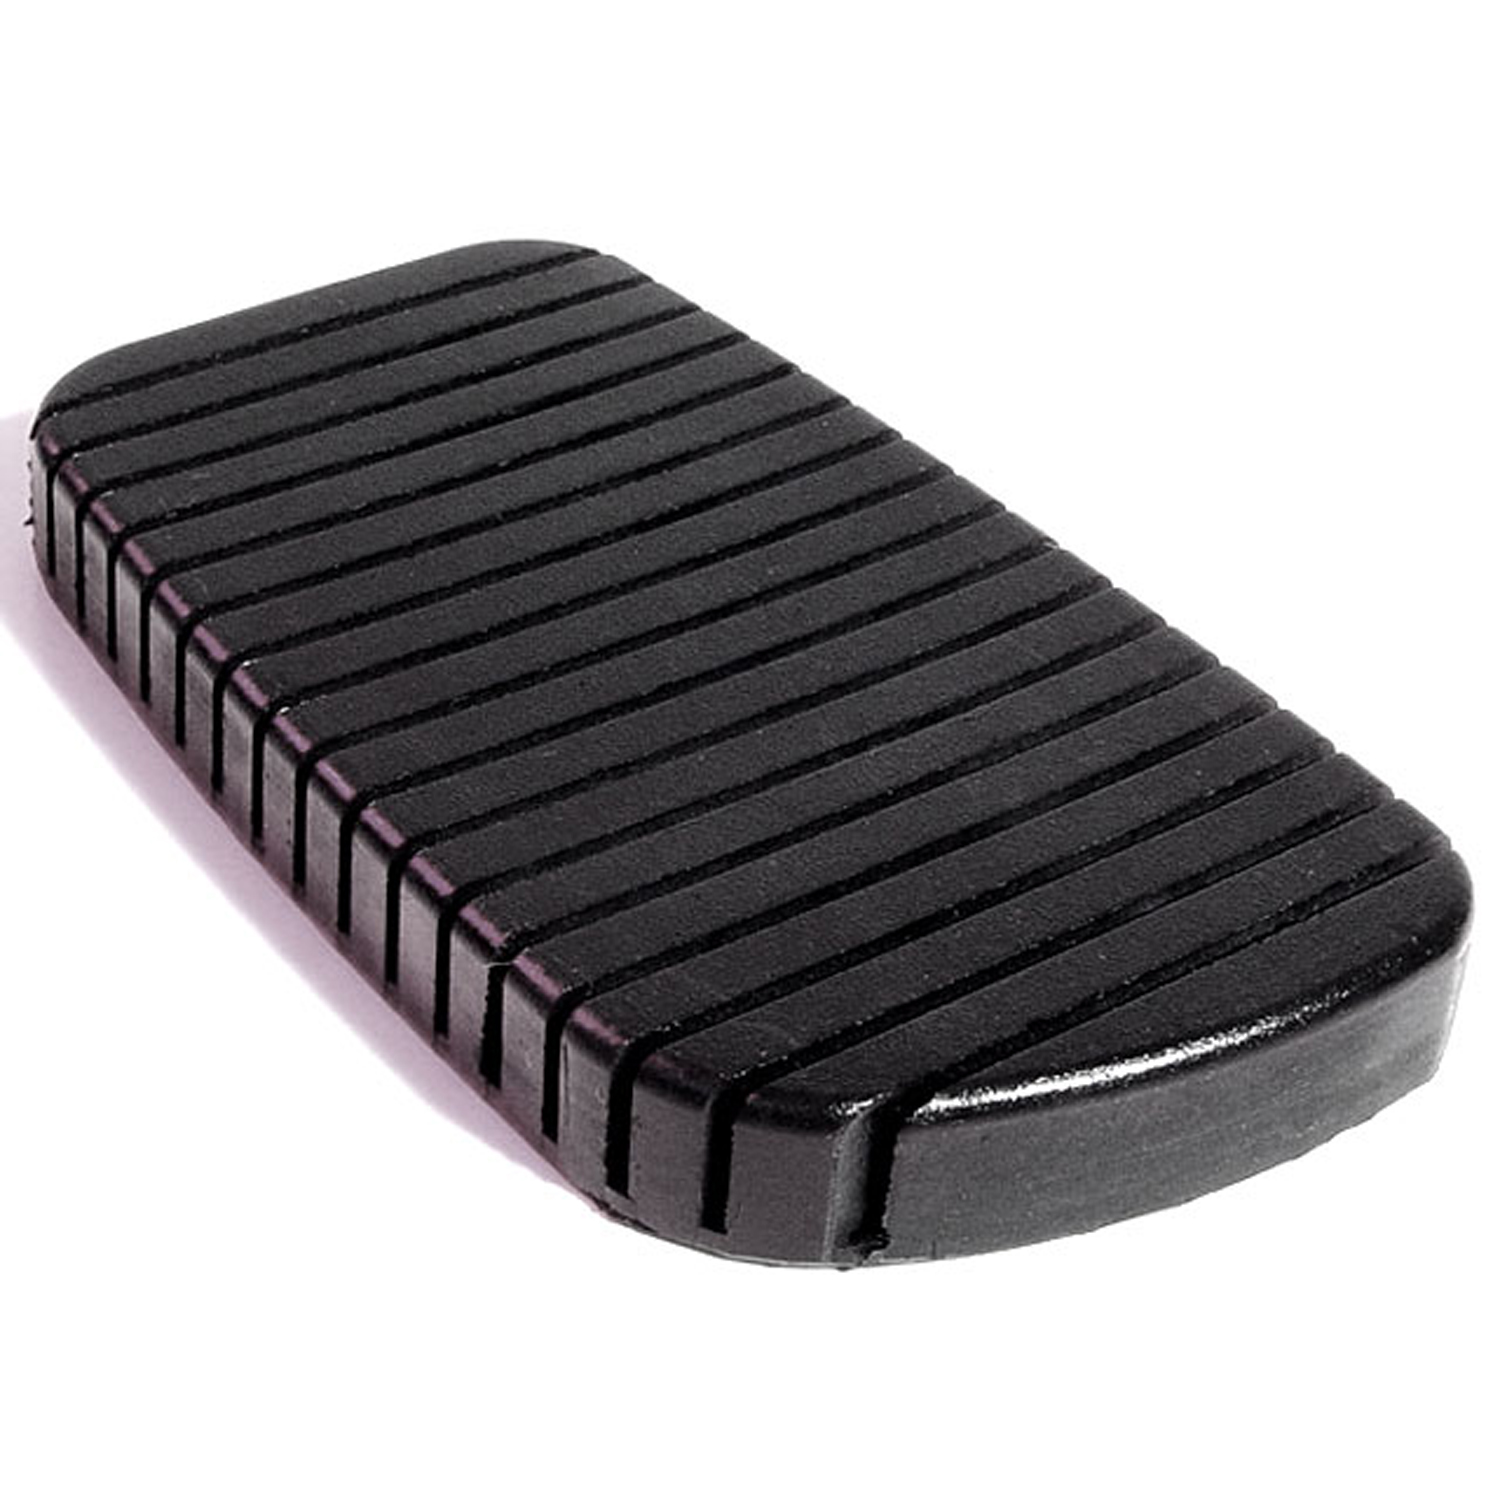 1956 Ford Customline Brake Pedal Pad.  Correct reproduction of a difficult part-CB 90-C